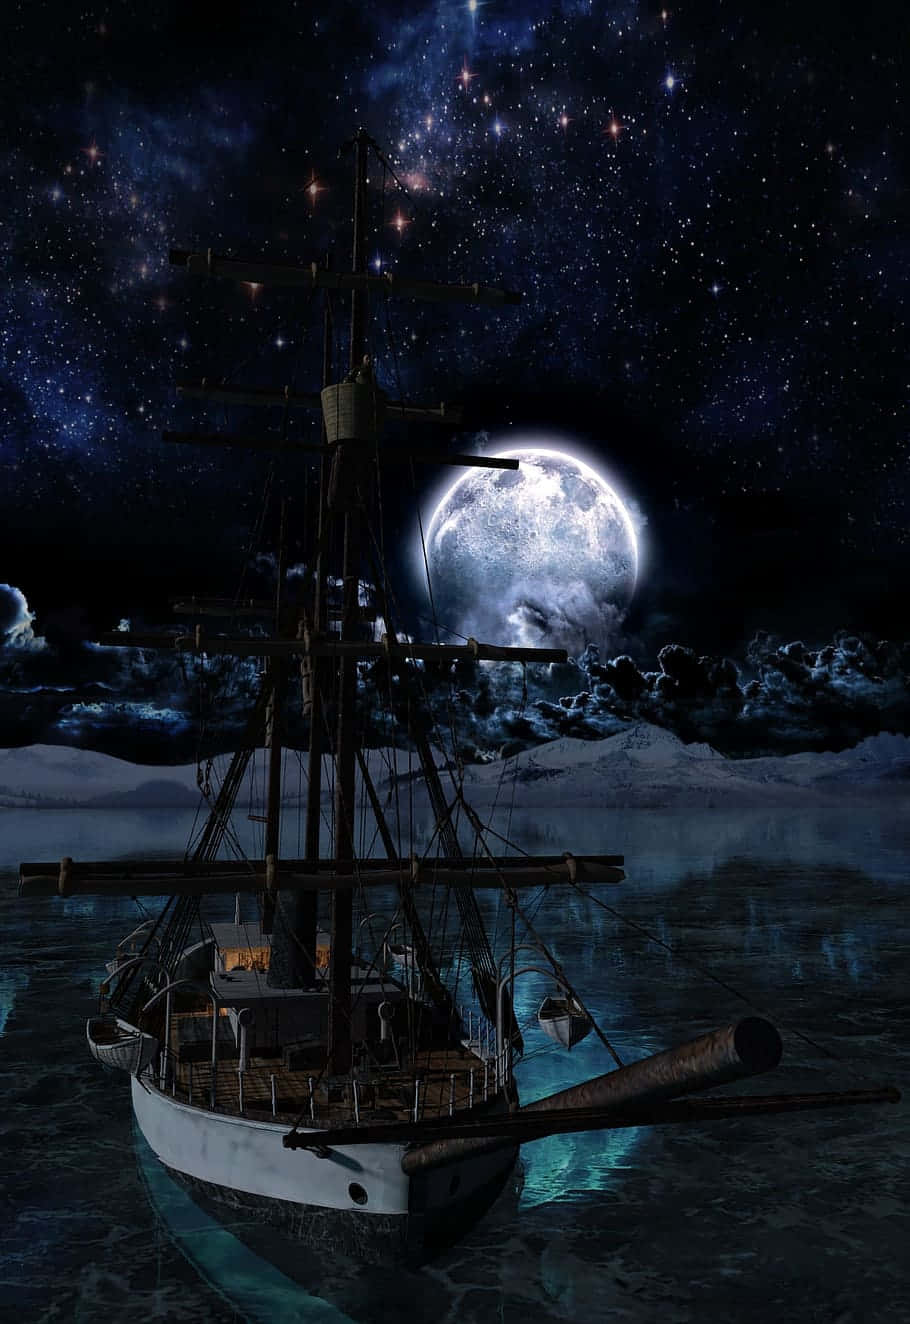 Beautiful Magical Night Sky With Boat Sailing With Giant Moon Background